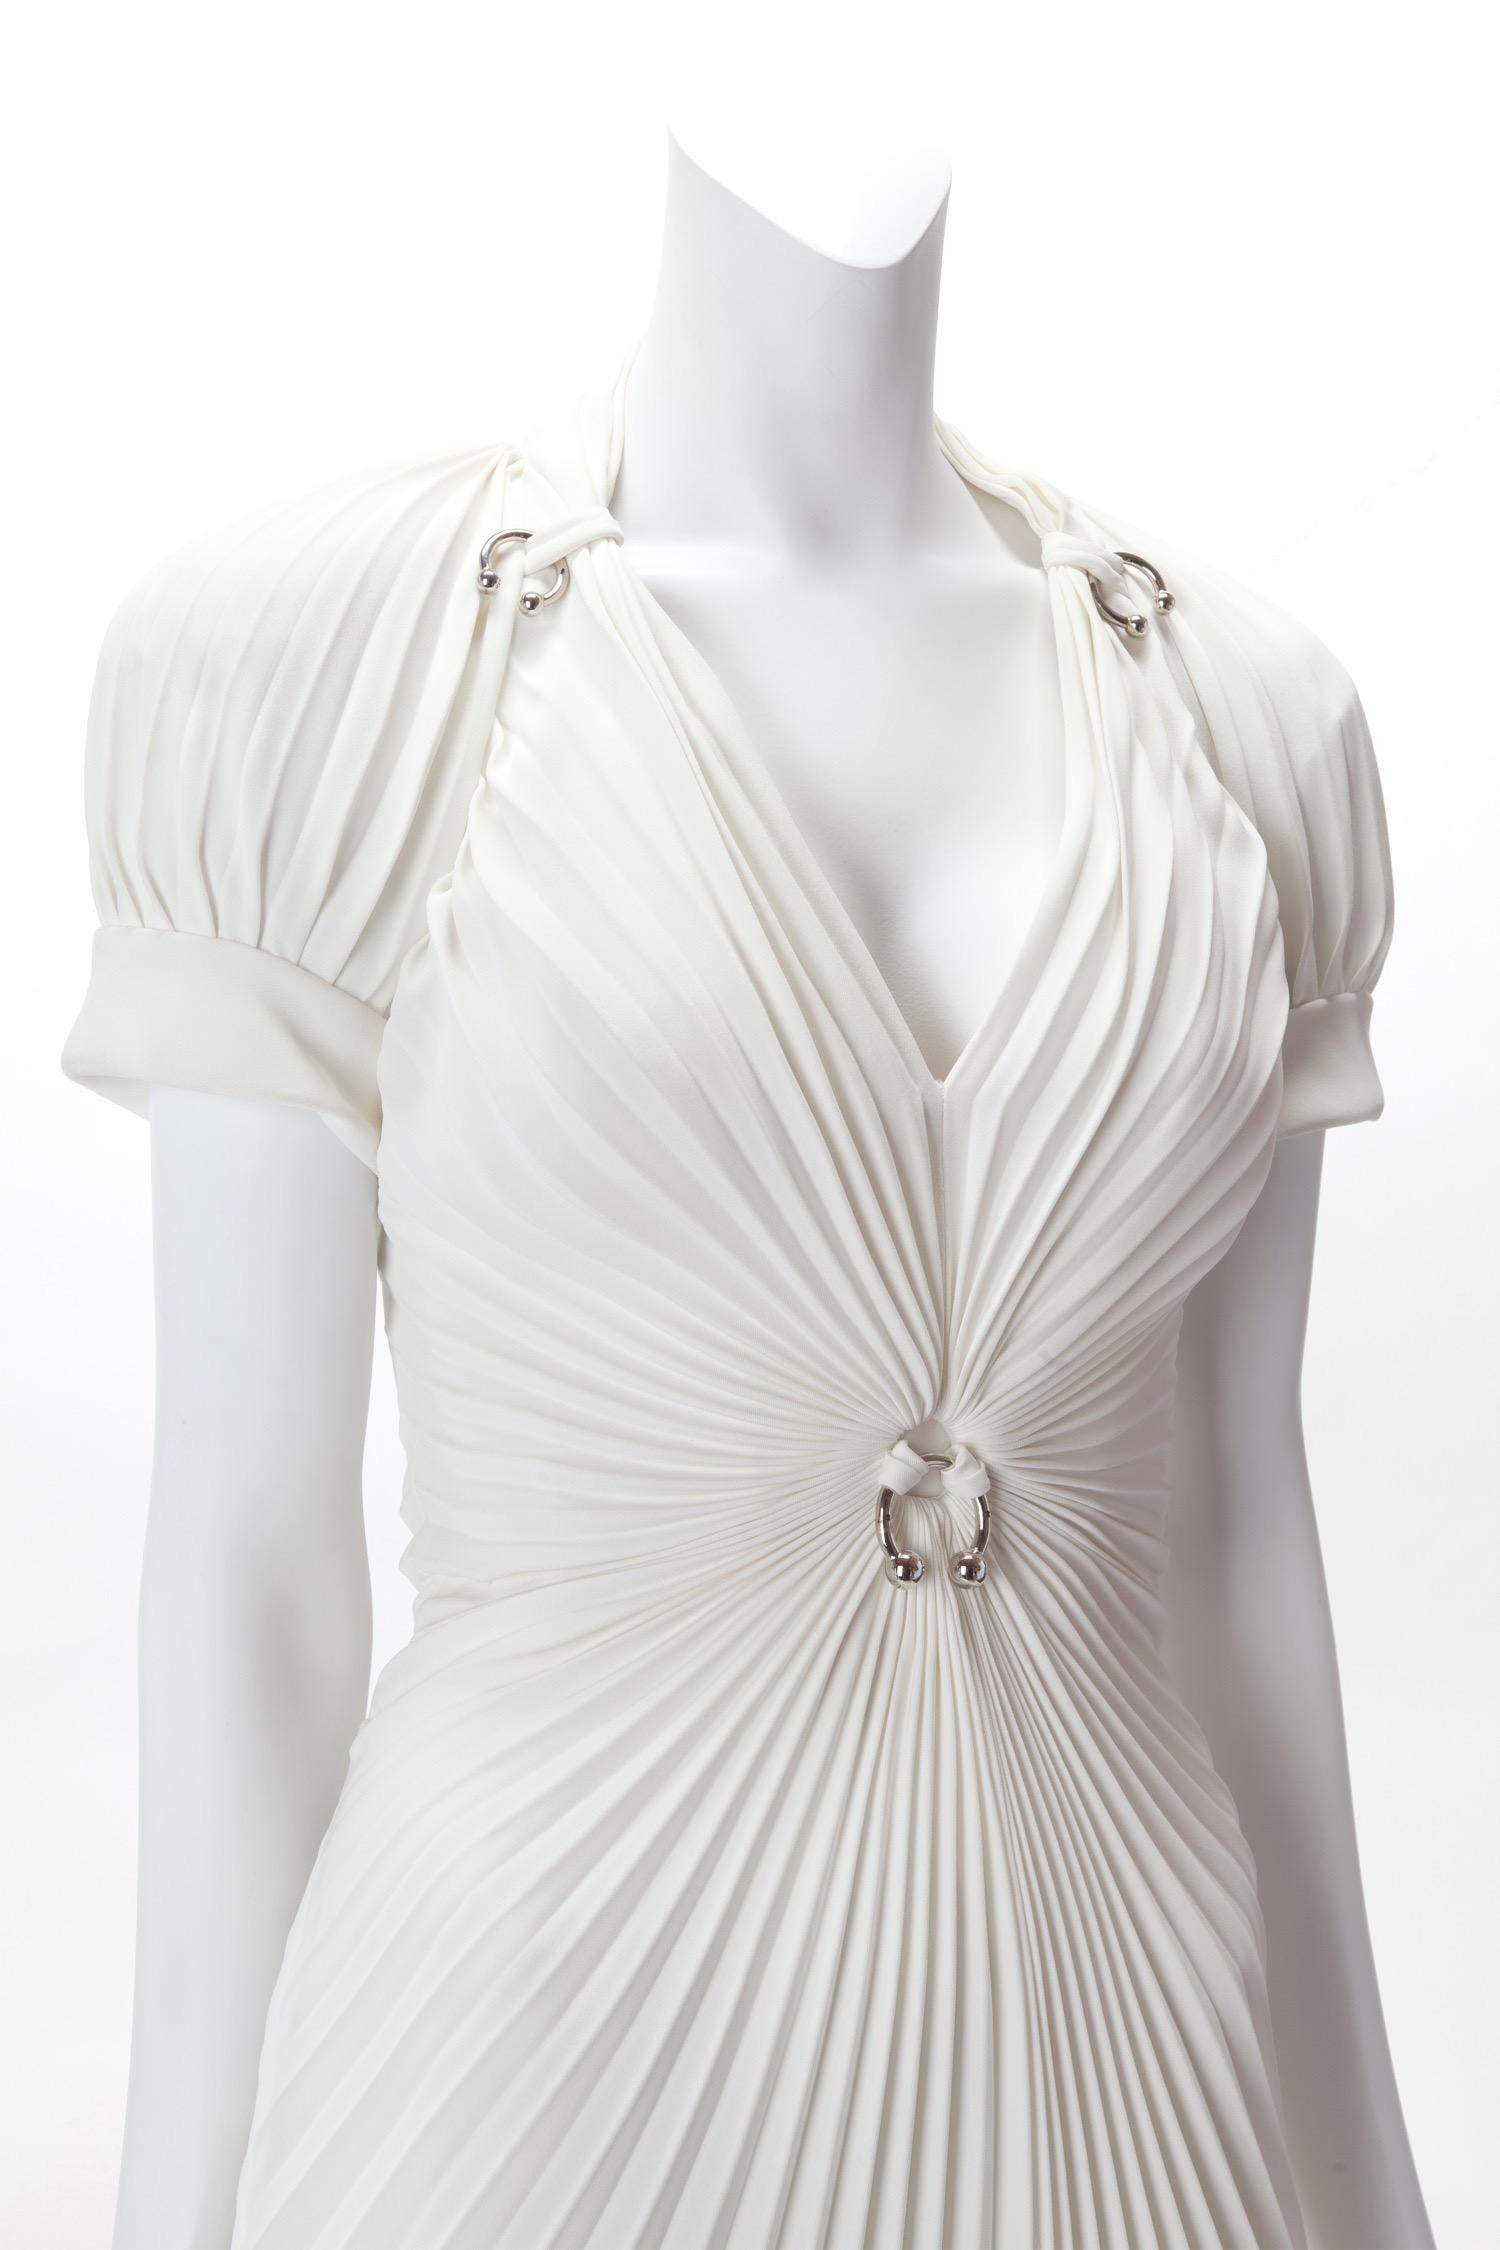 Thierry Mugler S/S 1994 White Fan Pleated Dress; with pleated gathering to central metal ring at midriff, satin-covered lightly-boned corset to interior. 
Fits US size 4, EU 34; Missing Label; Excellent condition.
